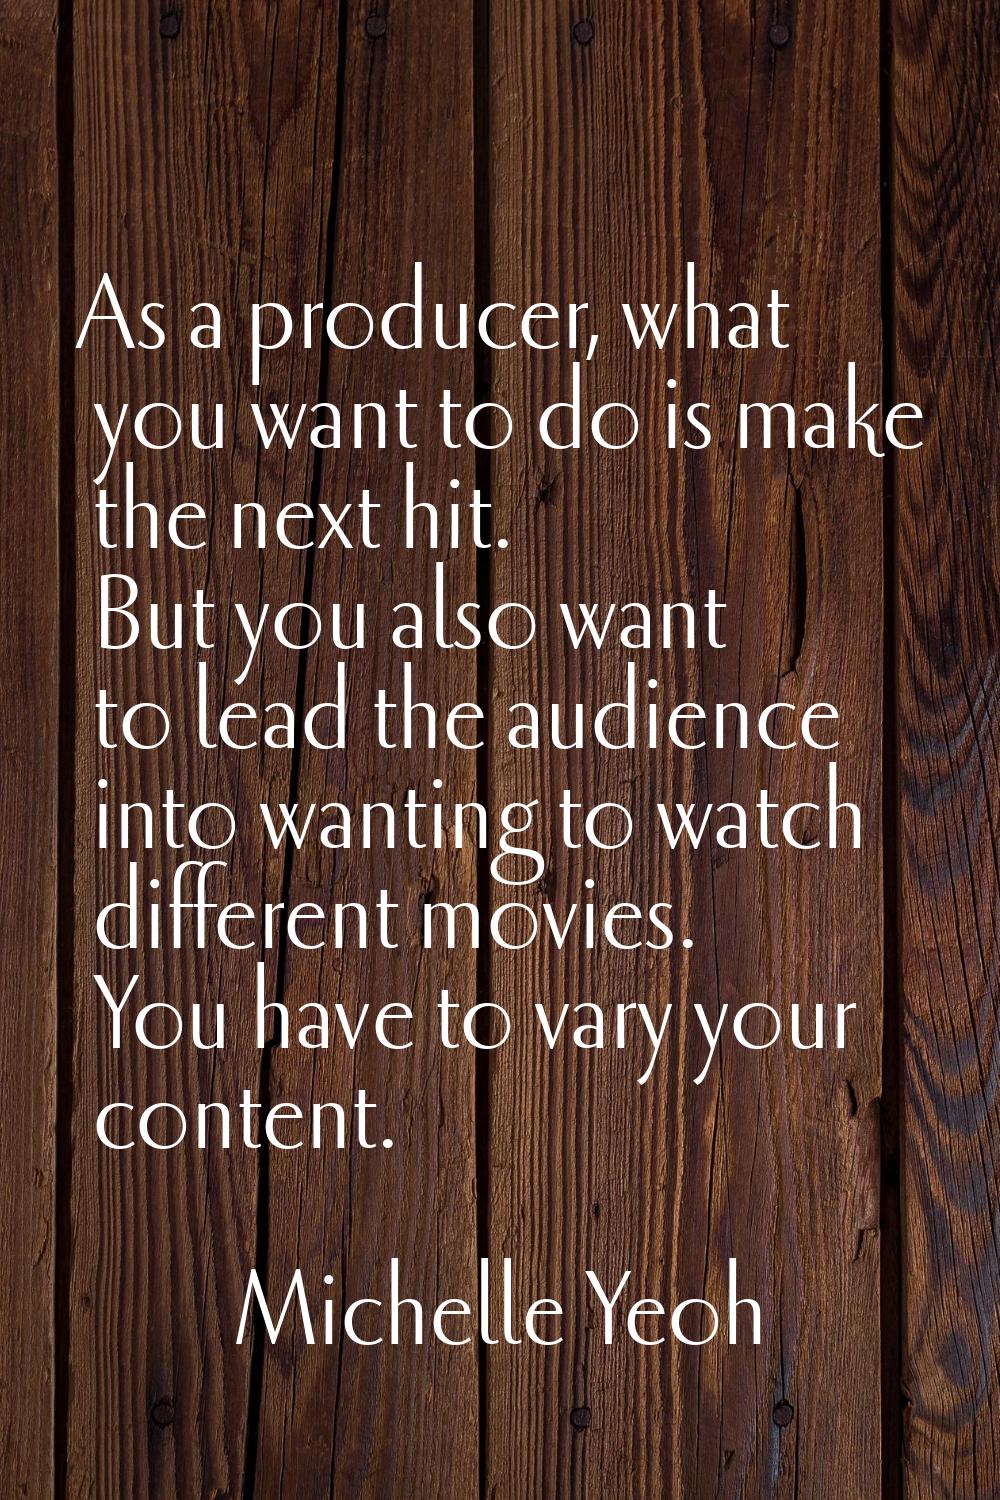 As a producer, what you want to do is make the next hit. But you also want to lead the audience int